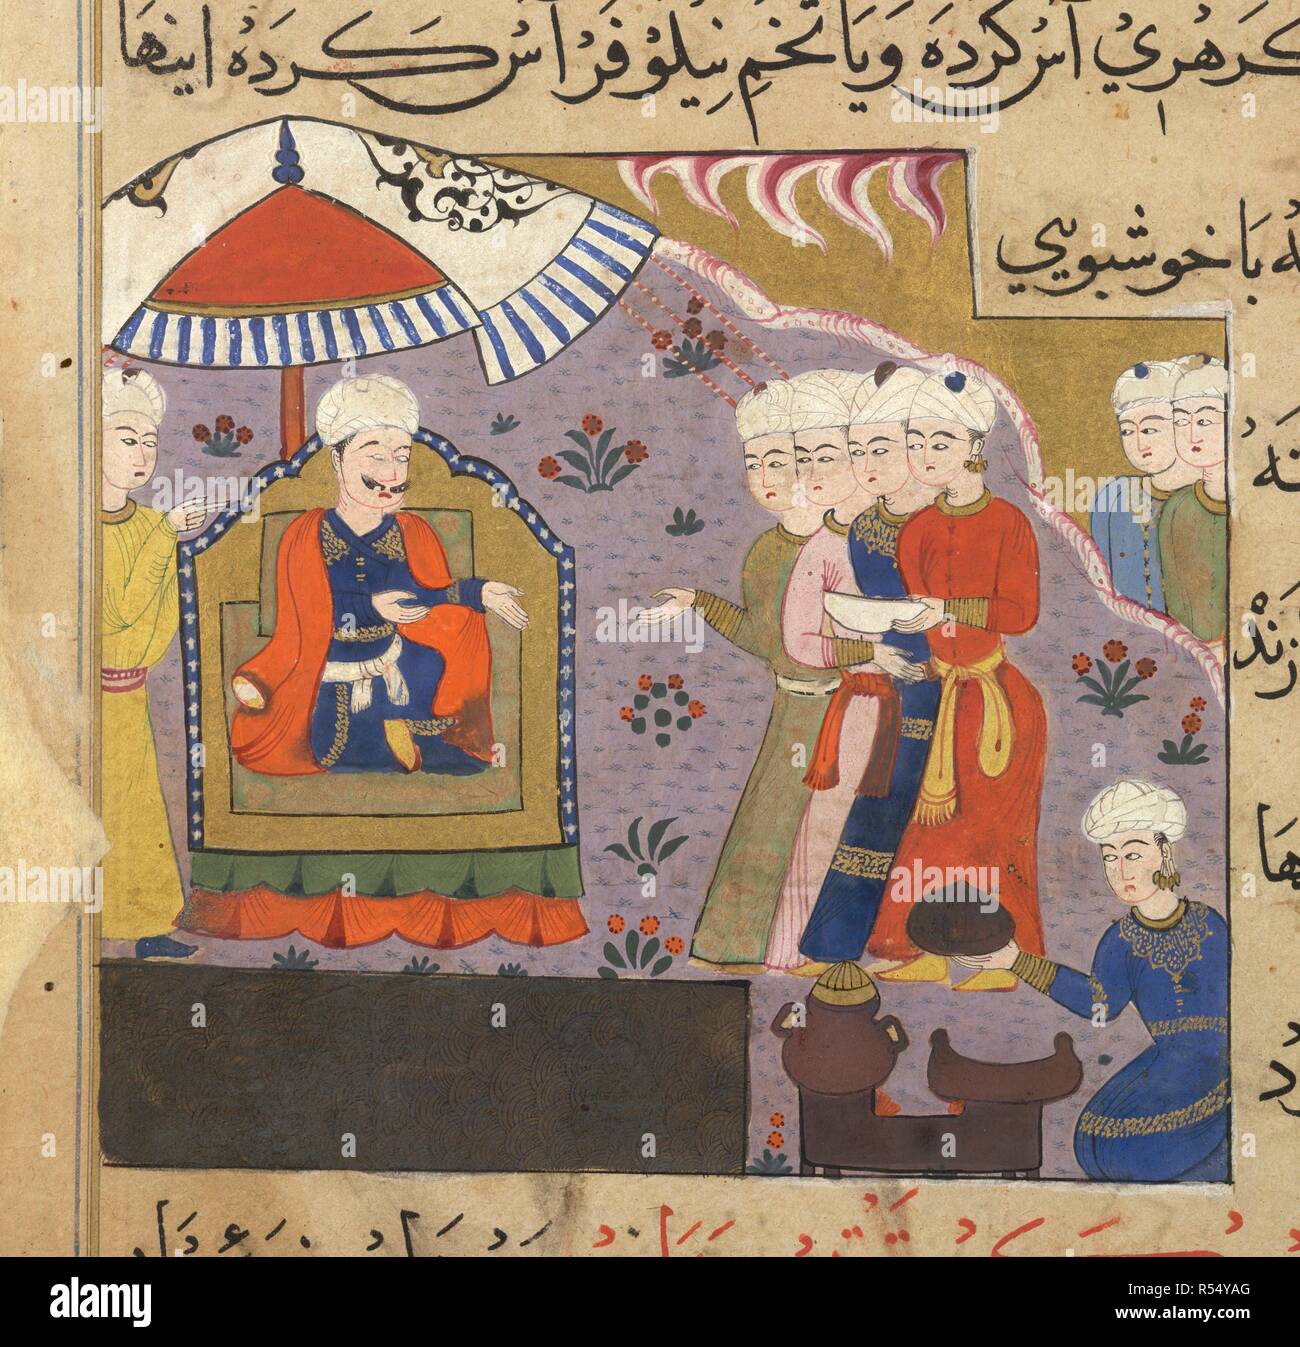 Bhat being prepared. The Ni'matnama-i Nasir al-Din Shah. A manuscript o. 1495 - 1505. Bhat (cooked rice) being prepared for the Sultan Ghiyath al-Din. Opaque watercolour. Sultanate style.  Image taken from The Ni'matnama-i Nasir al-Din Shah. A manuscript on Indian cookery and the preparation of sweetmeats, spices etc.  Originally published/produced in 1495 - 1505. . Source: I.O. ISLAMIC 149, f.44v. Language: Persian. Stock Photo